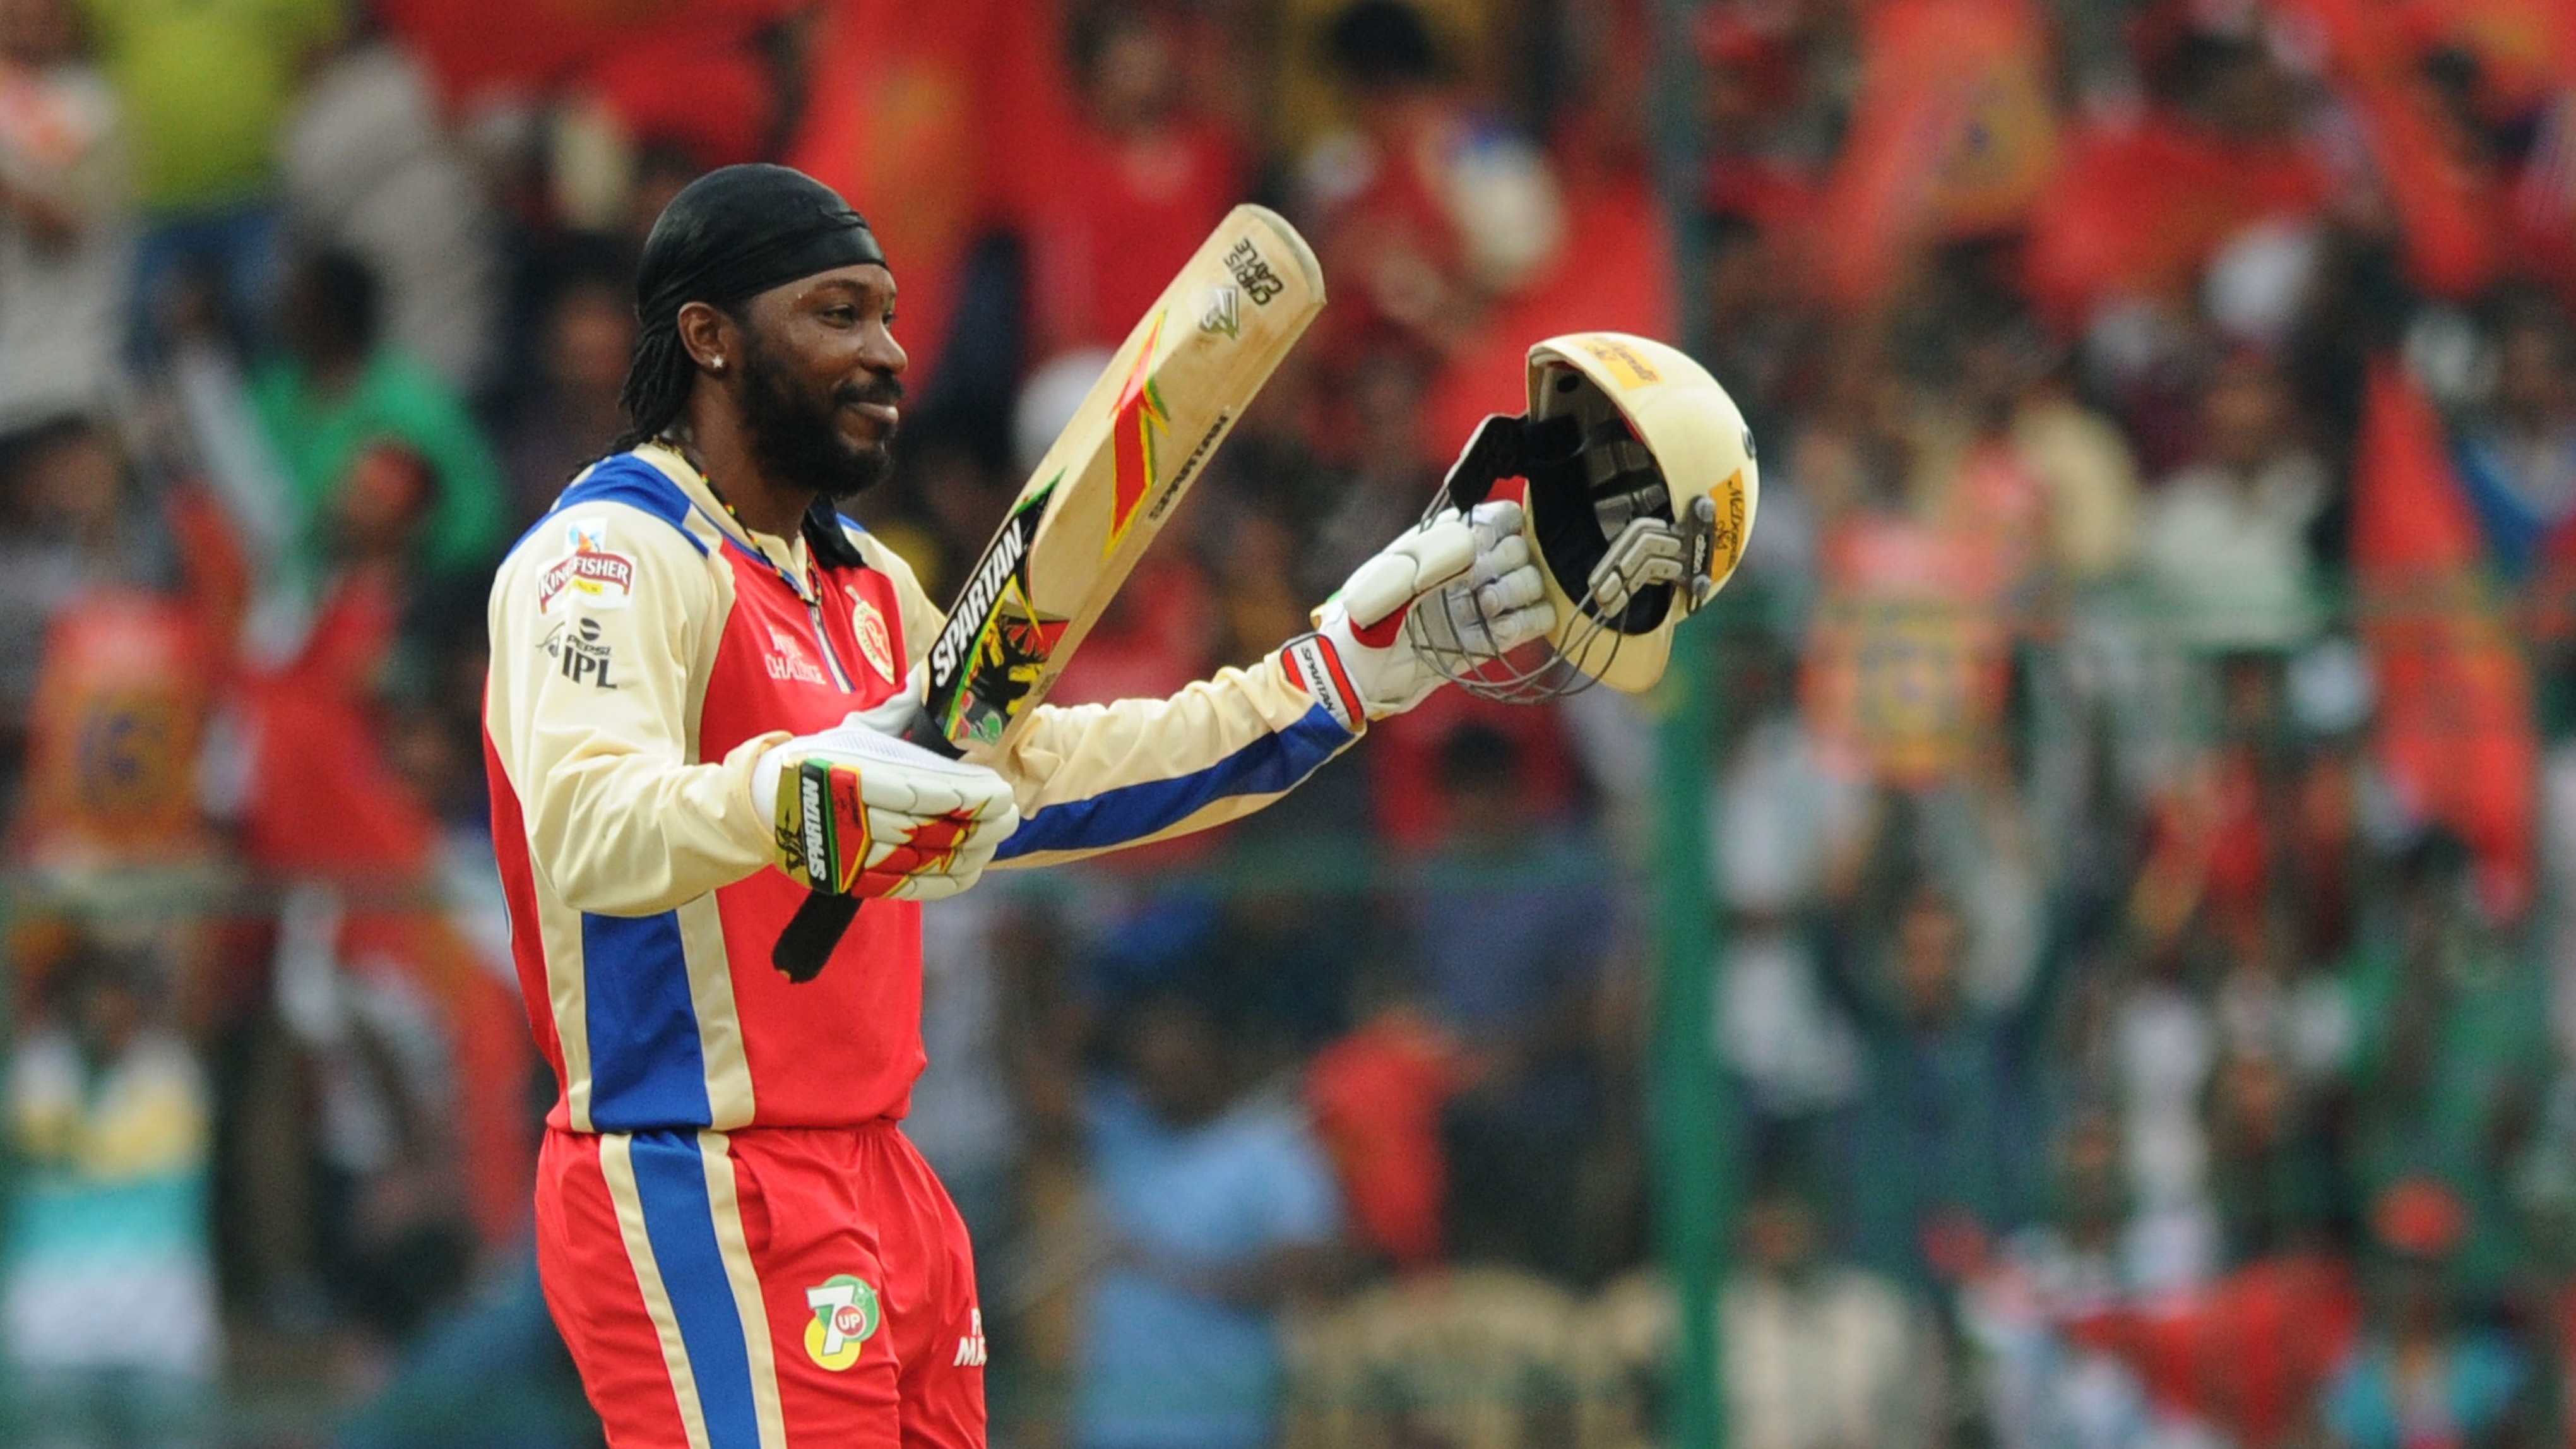 On This Day: WATCH - Chris Gayle hits fastest ever ton in cricket history during his record 175*